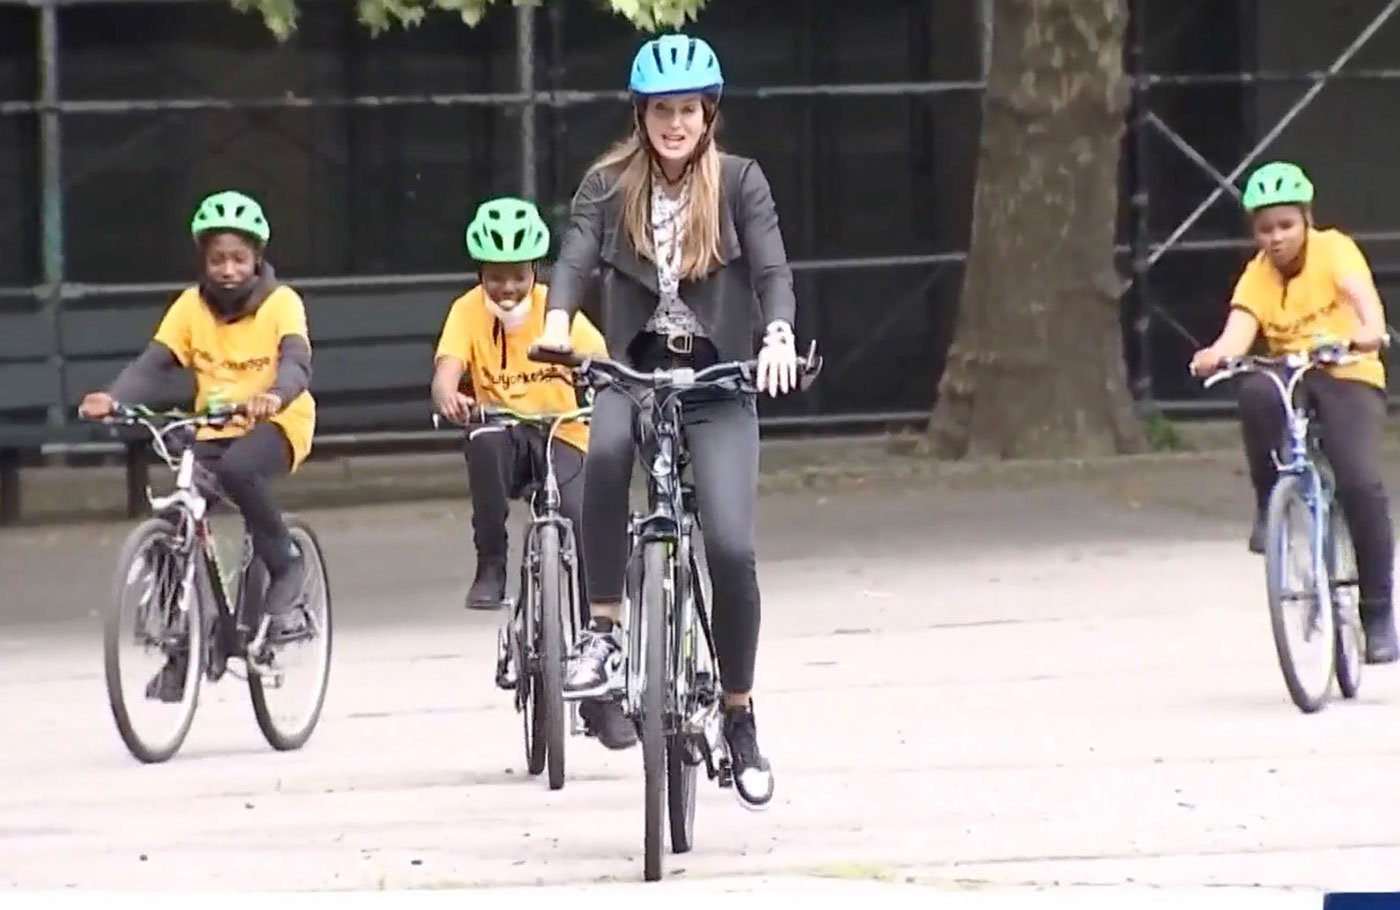 Kids on Bikes Initiative Comes to NYC